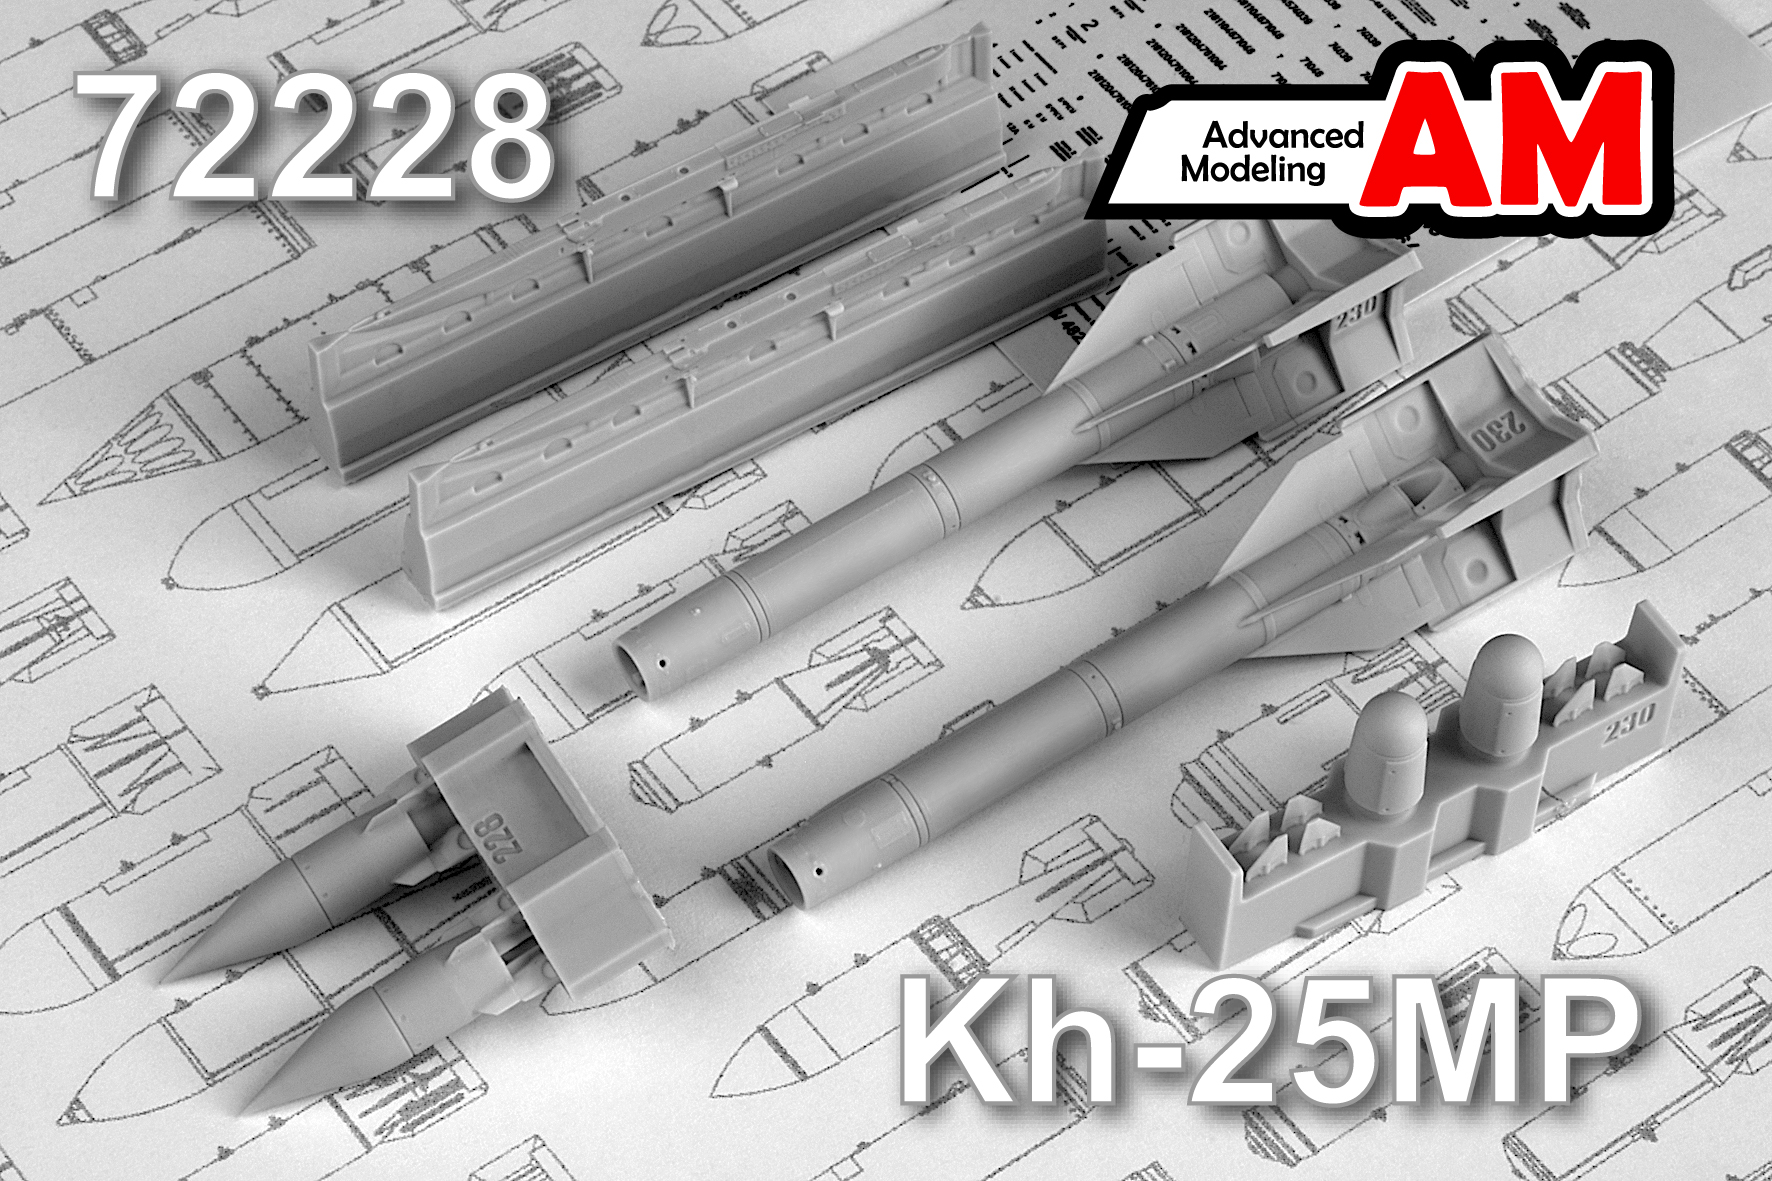 Additions (3D resin printing) 1/72 Aircraft guided missile Kh-25MP1 with launcher APU-68UM2 (Advanced Modeling) 